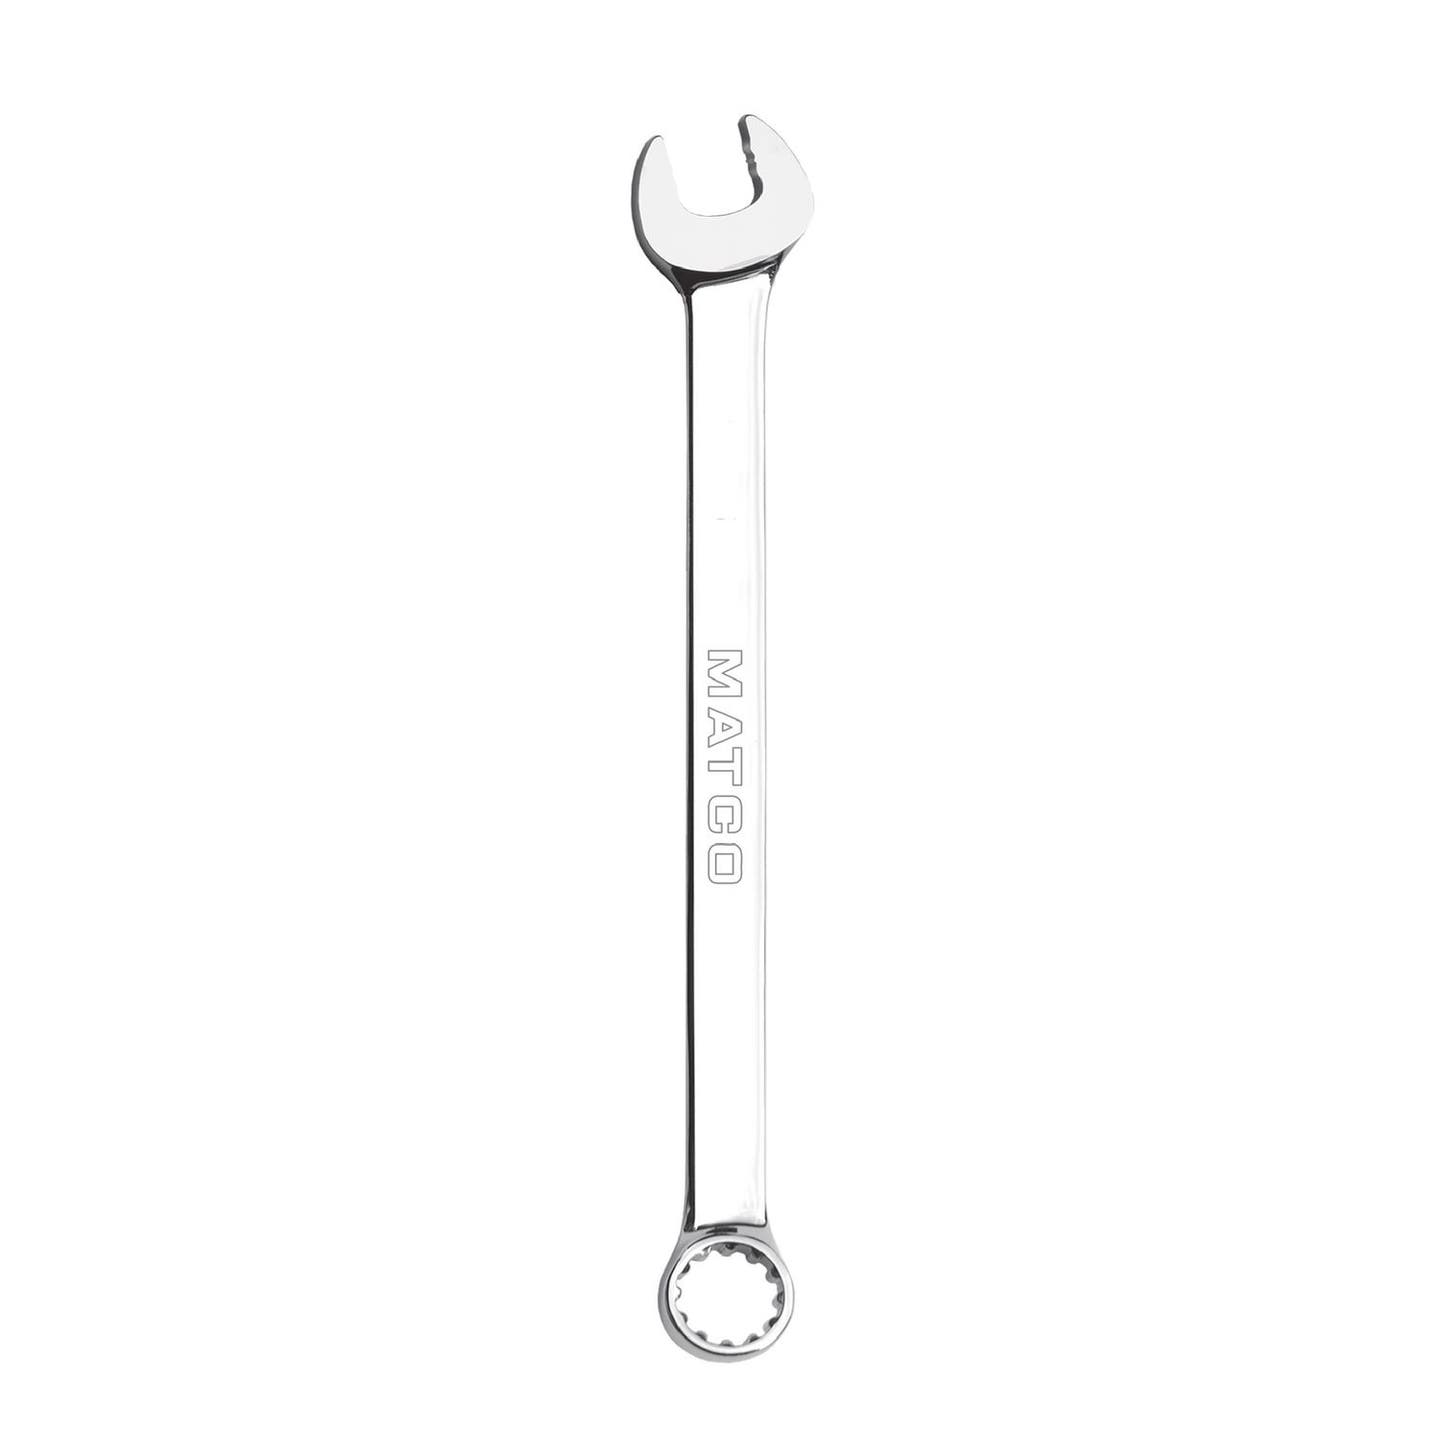 5/16" LONG COMBINATION WRENCH